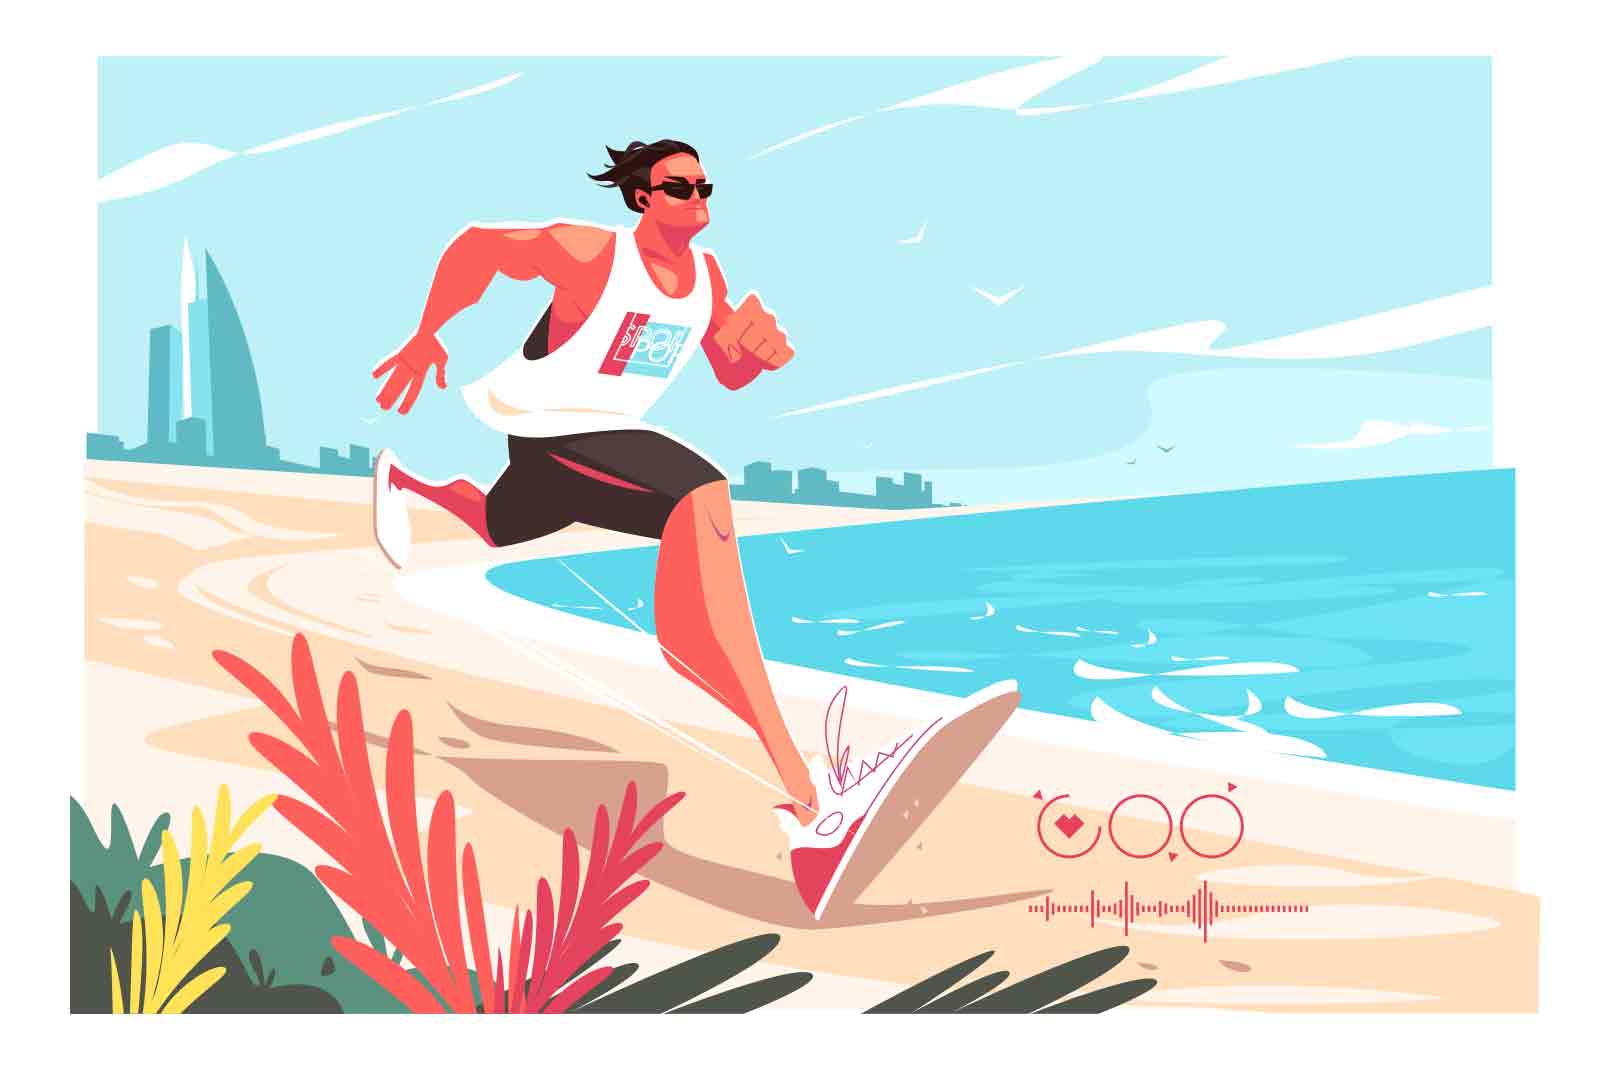 Strong male jogging on beach near ocean vector illustration. Hold tempo while running flat style. Active lifestyle, nature, health concept